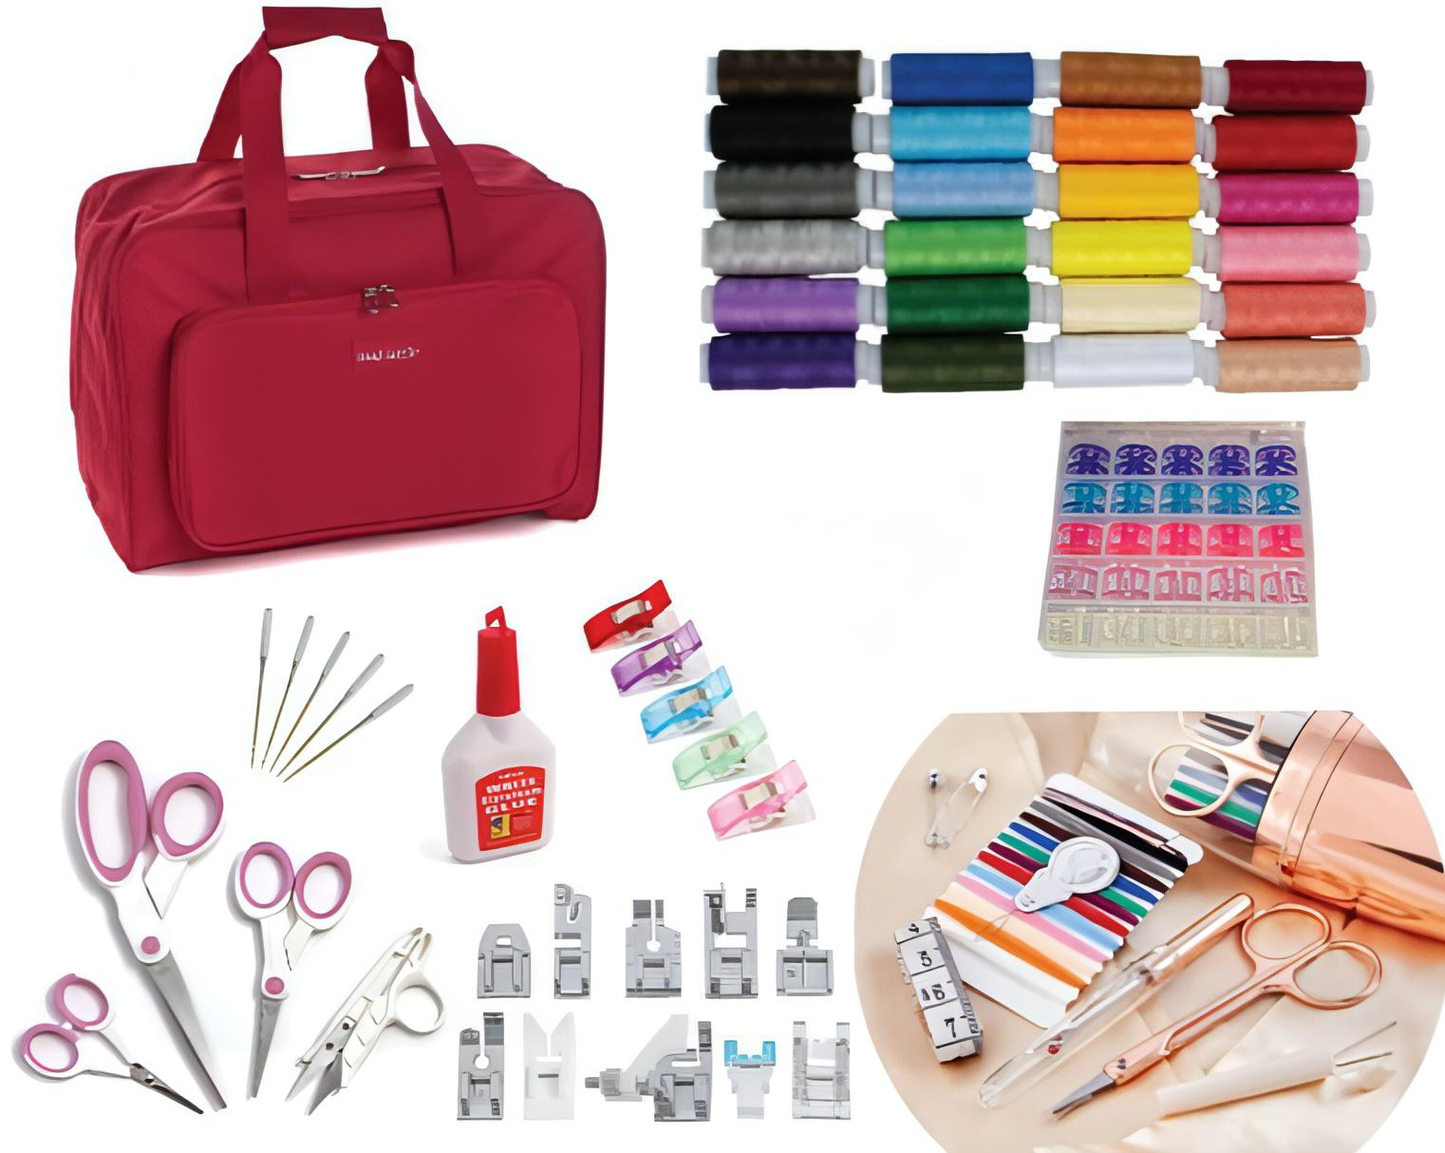 Ultimate Sewing Gift Bundle worth £169.40 - Exclusive to Singer Outlet - limited stock left on this Christmas Sale offer (2020 version)